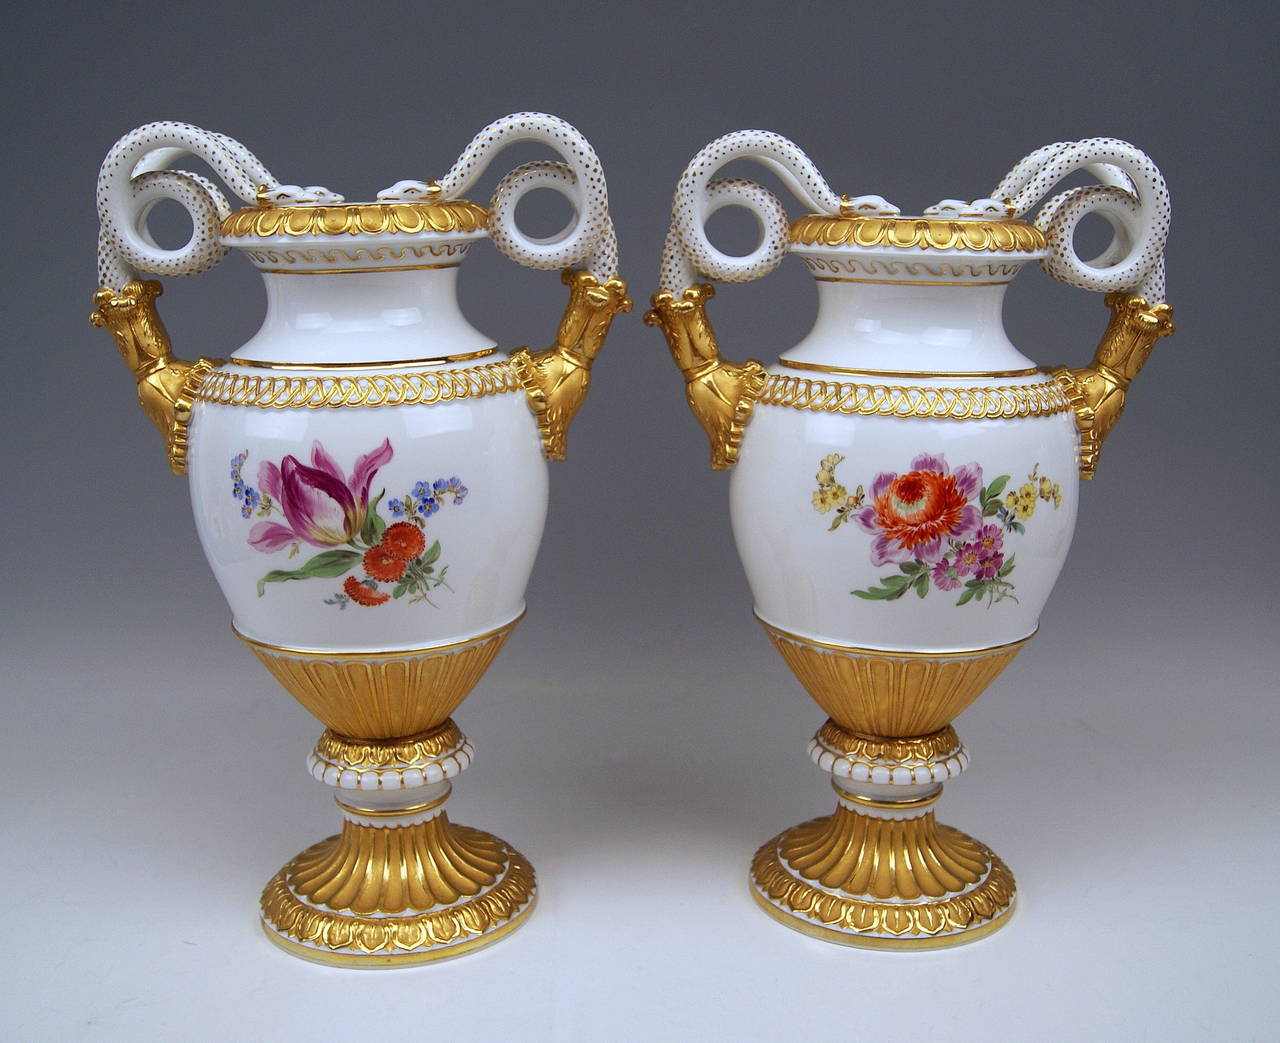 Meissen Gorgeous Tall Snake Handles Vases of remarkable size
height:  38.5 cm  ( = circa 15.4 inches ) 
width  (measured from one handle to other): 
25.0 cm   ( = circa  10.0  inches )
diameter of base:  14 cm   ( = circa 5.6  inches )